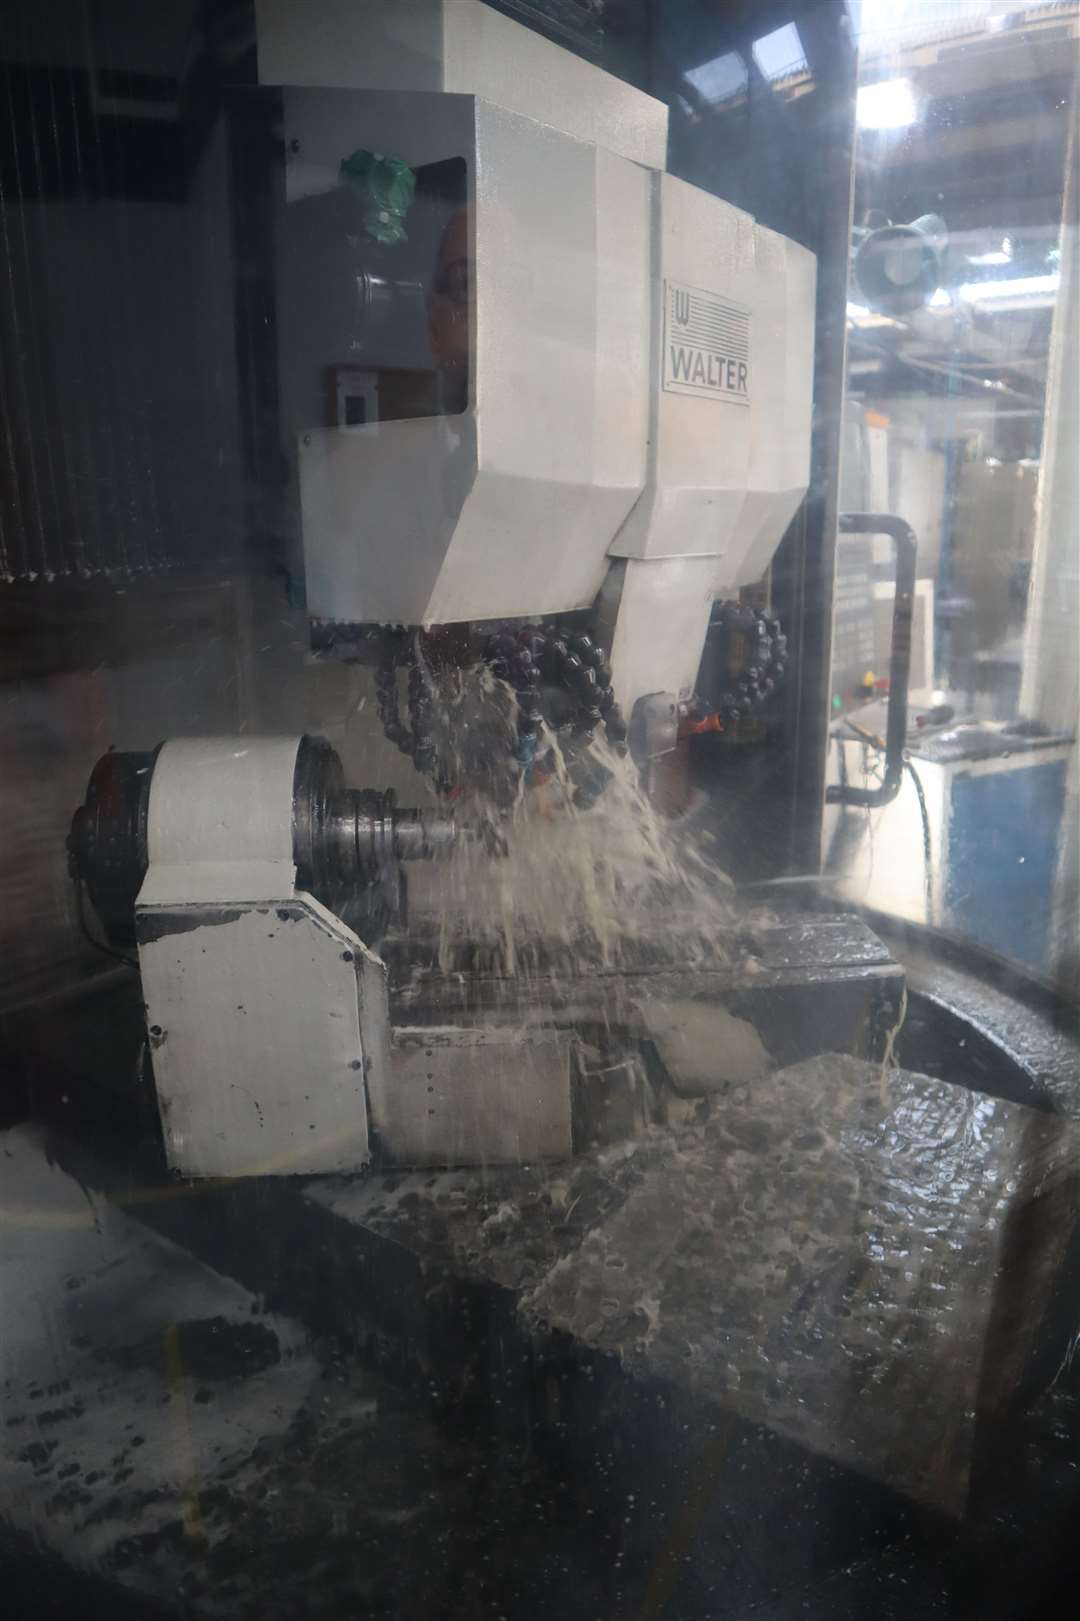 One of the cutting machines in operation at Cajero